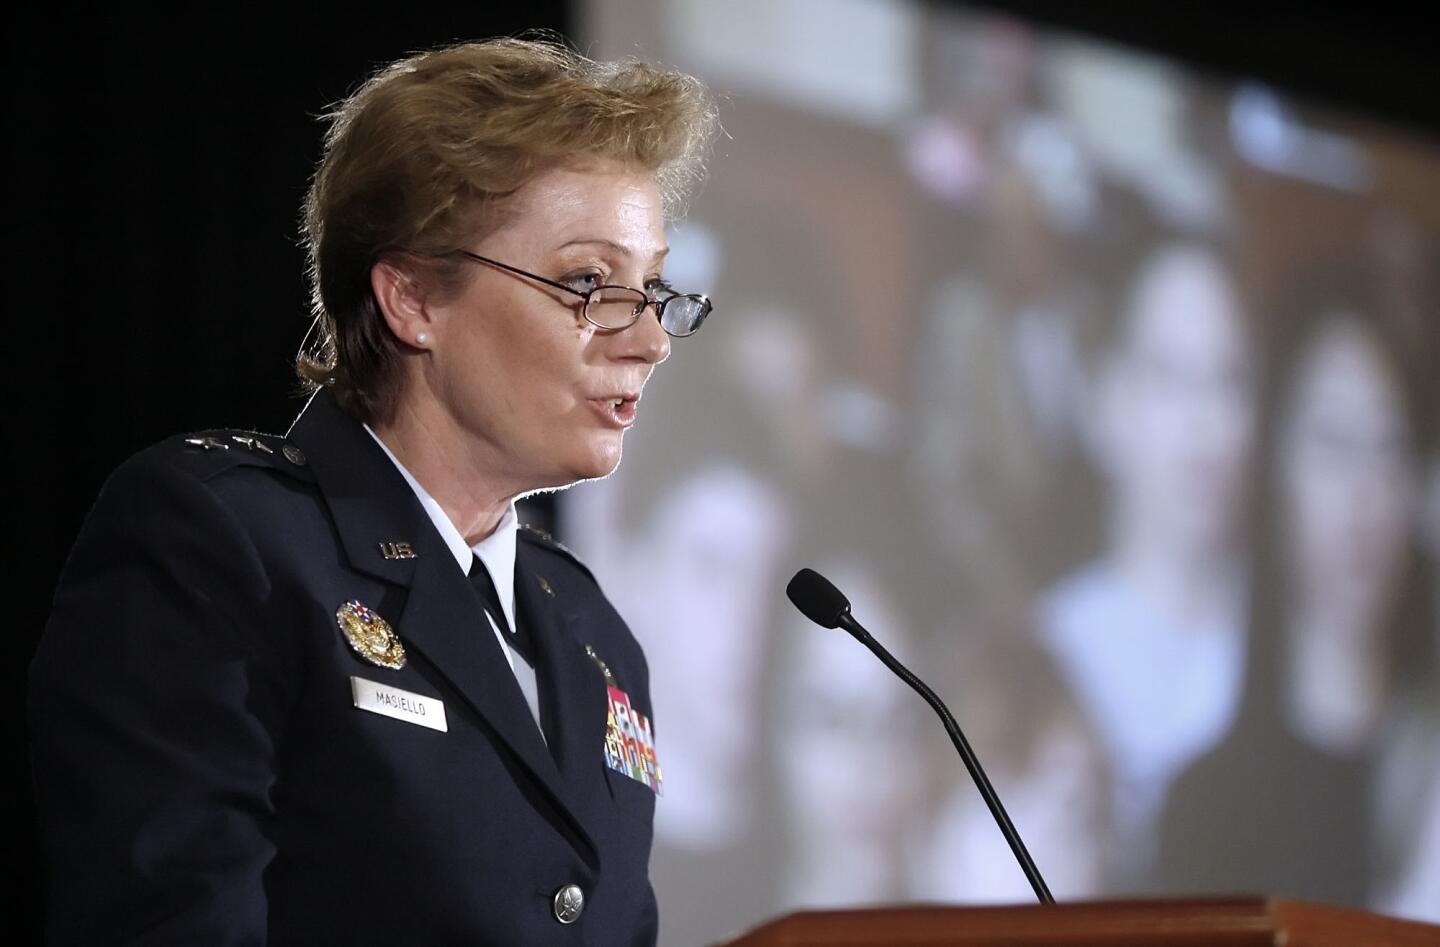 U.S. Air Force Major General Wendy Masiello gives the remarks during the first all-female, all-branch swearing in ceremony at the California Disabled Veterans Business Alliance breakfast.